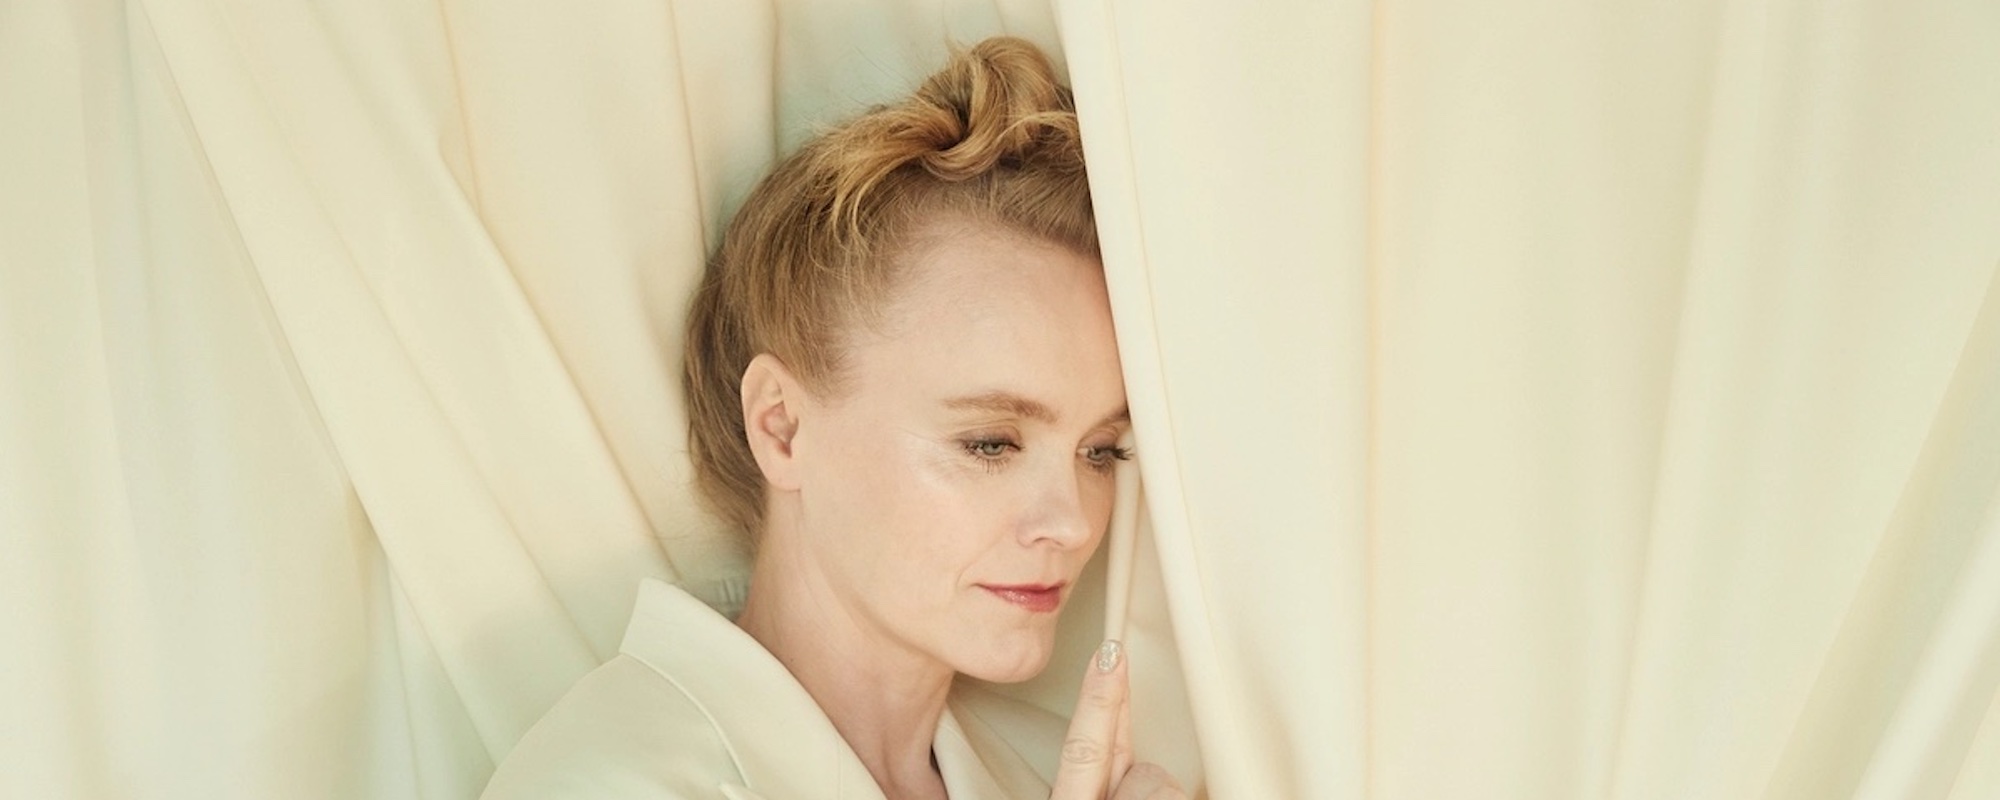 Ane Brun Reviews 20 Years of Career with Compilations: “My Life Has Become a Lot Better”